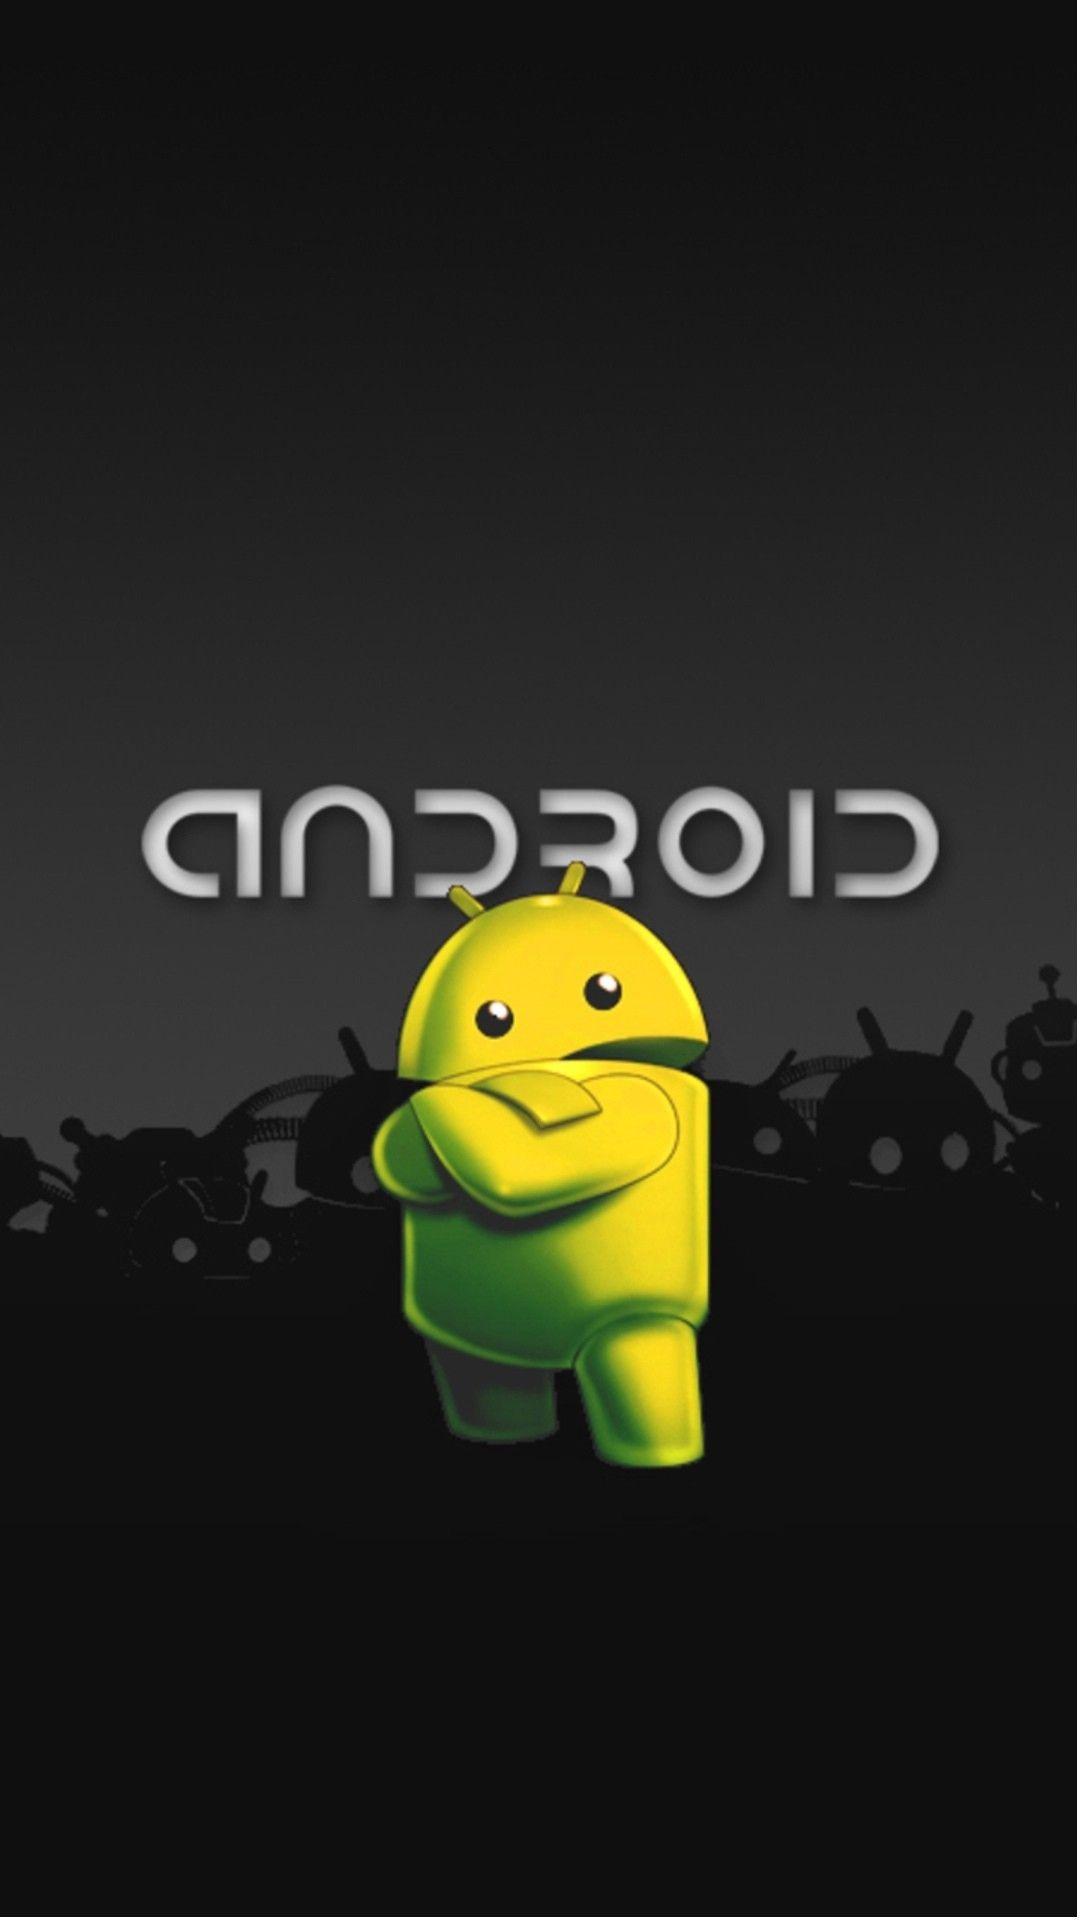 Android Logo Mascot Cool Android Wallpaper free download